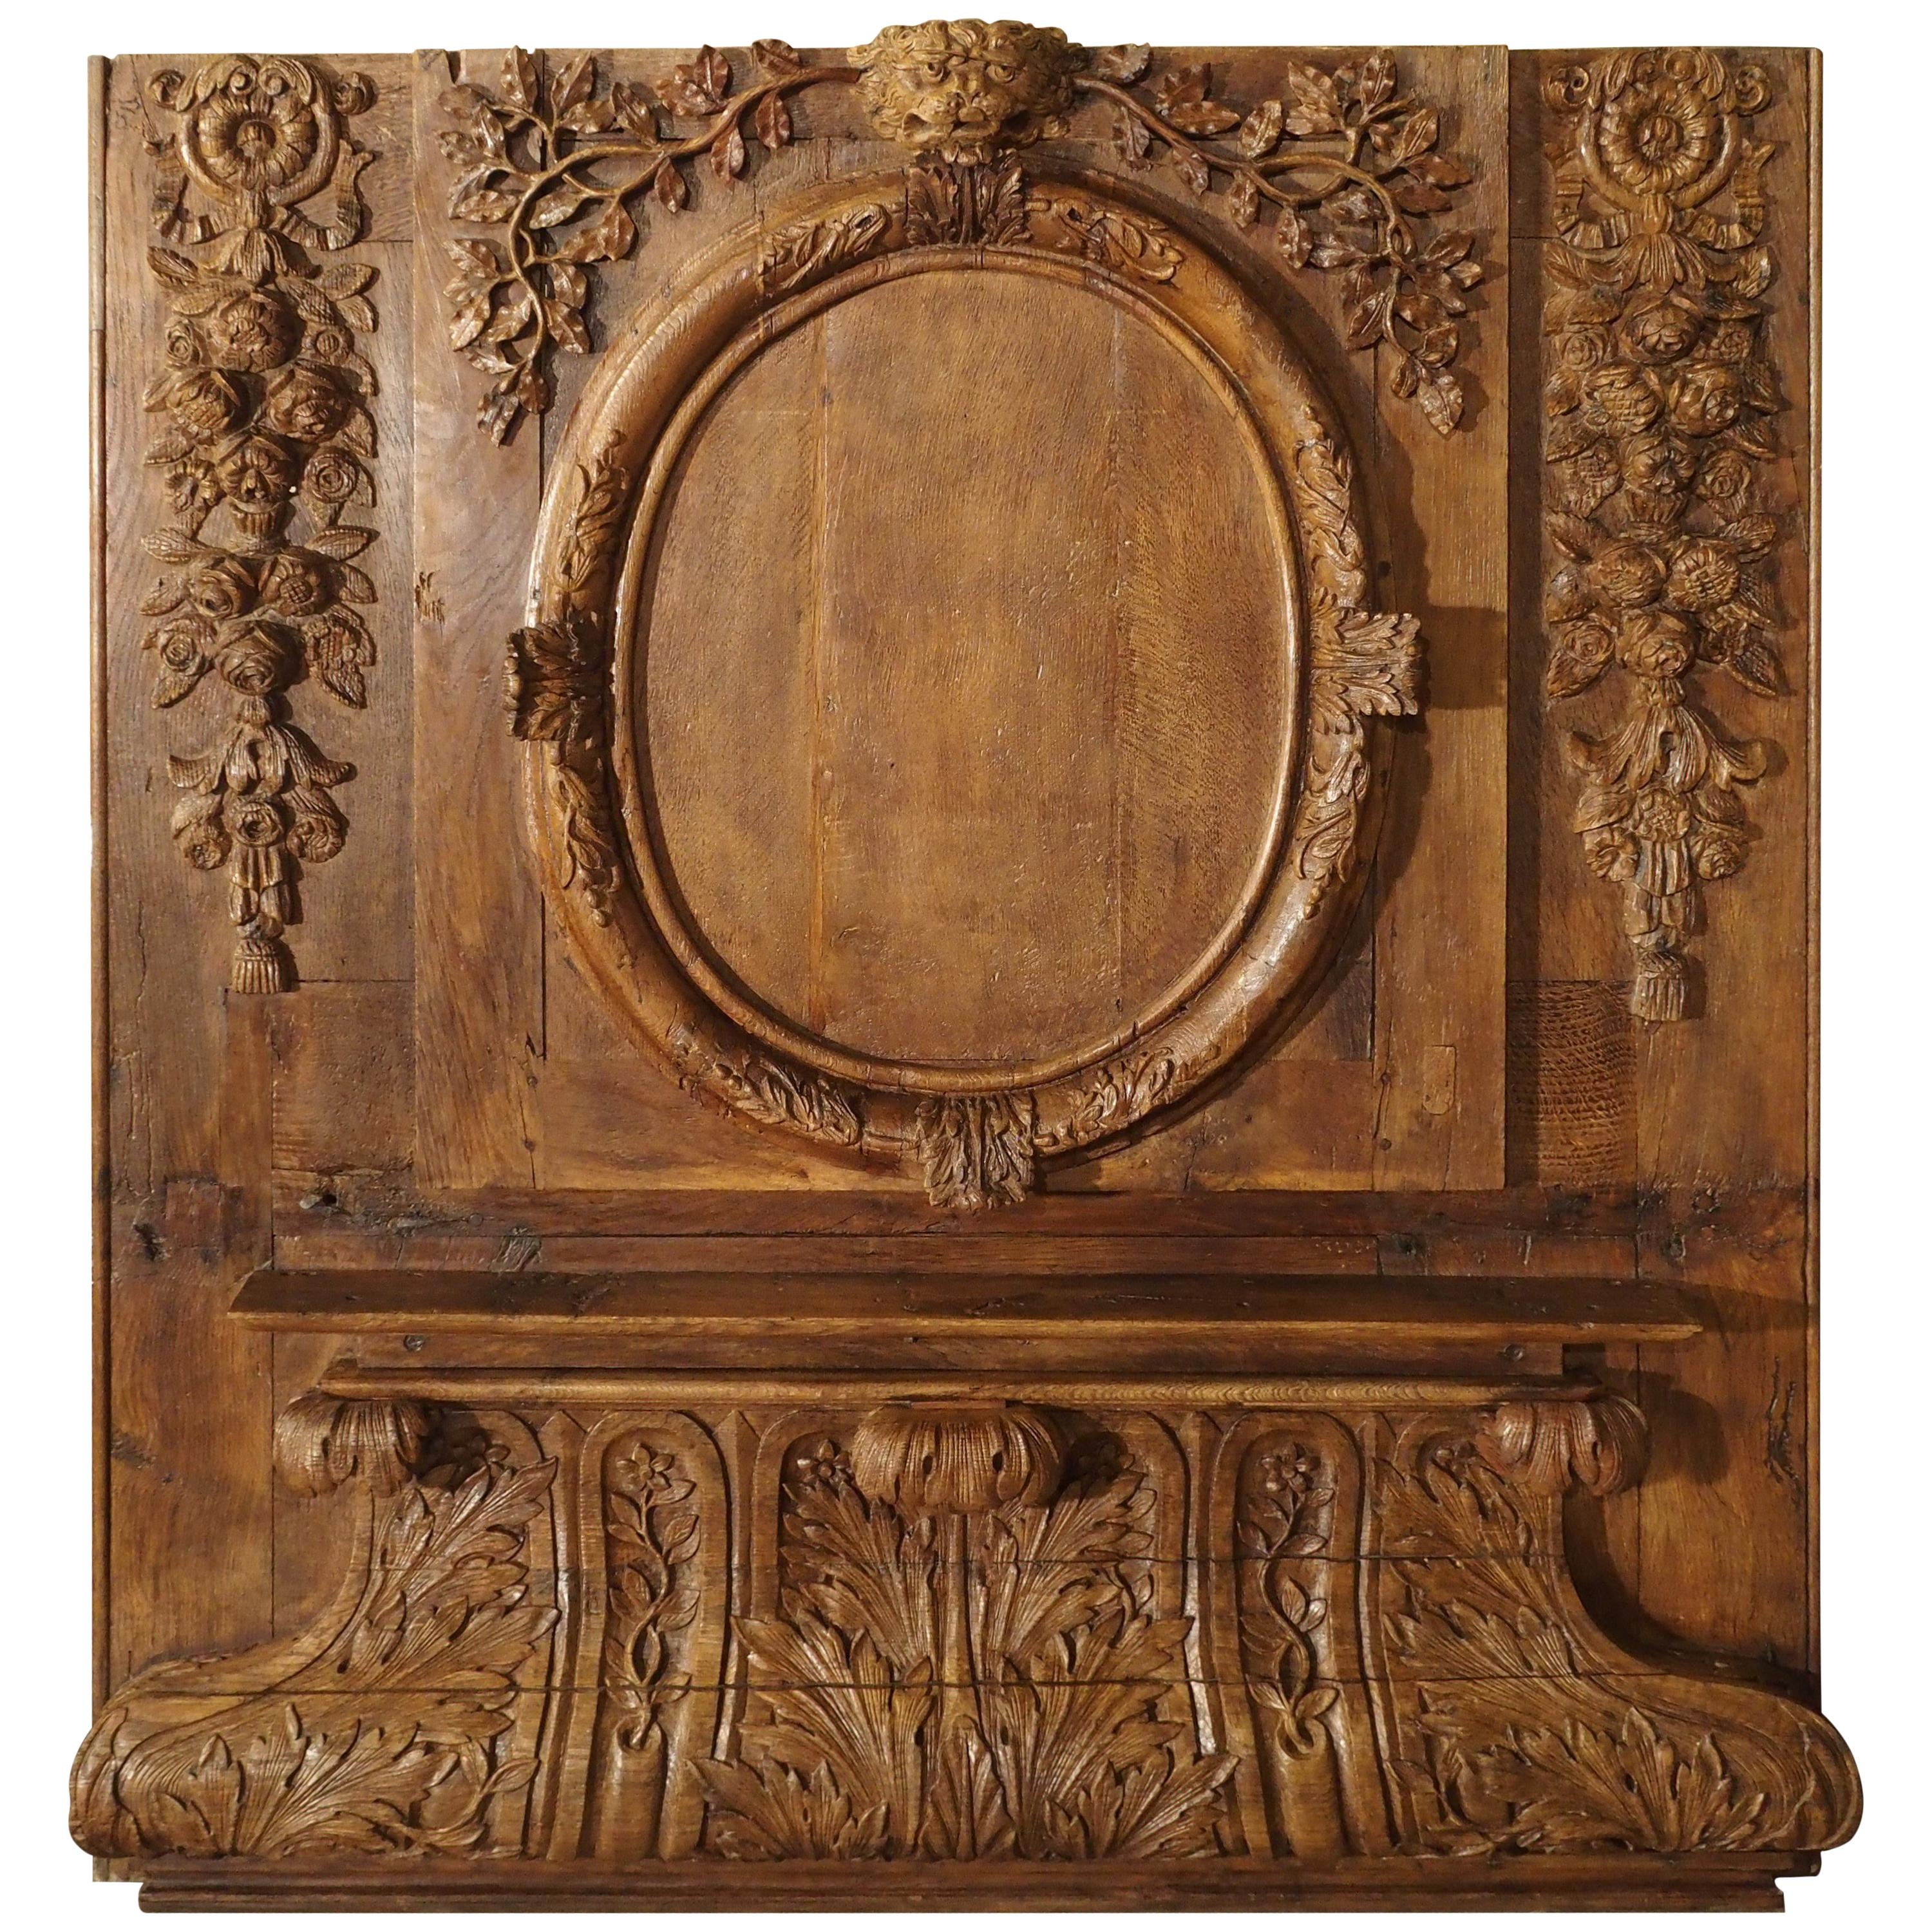 Exceptional 18th Century Oak Boiserie Panel from Chateau Saint-Maclou, Normandy